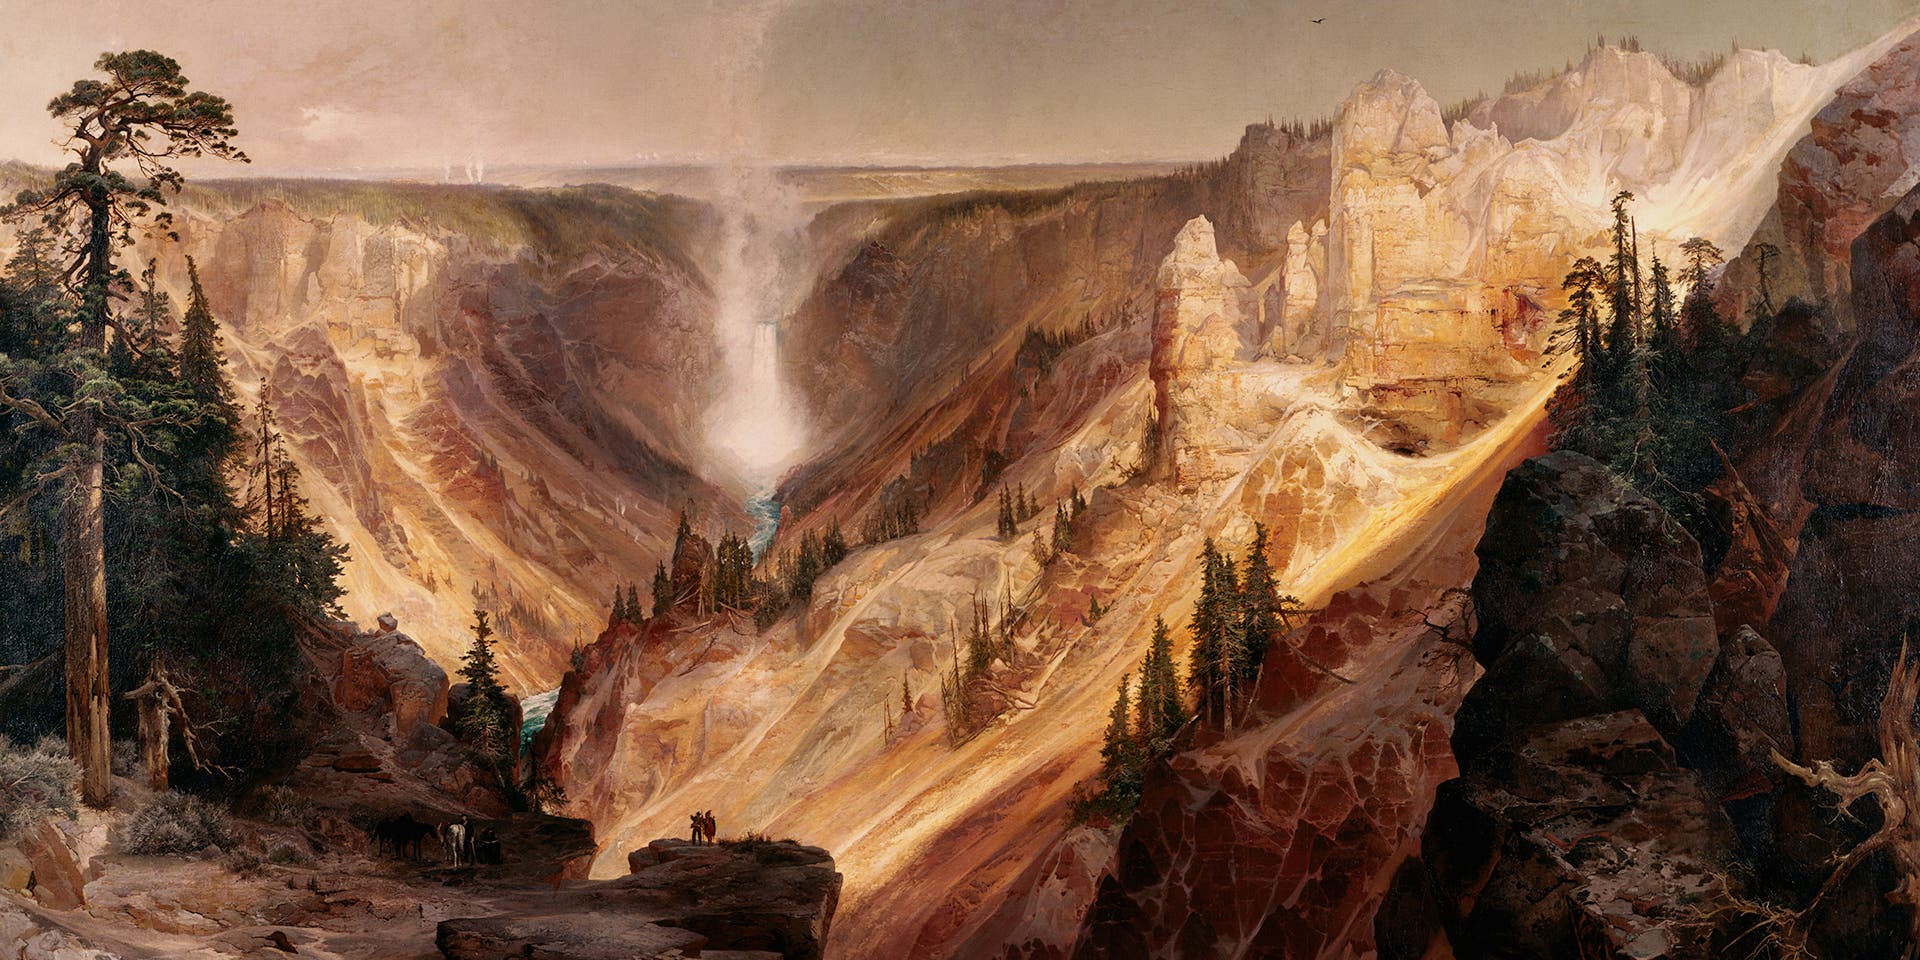 The Grand Canyon of the Yellowstone by Thomas Moran.